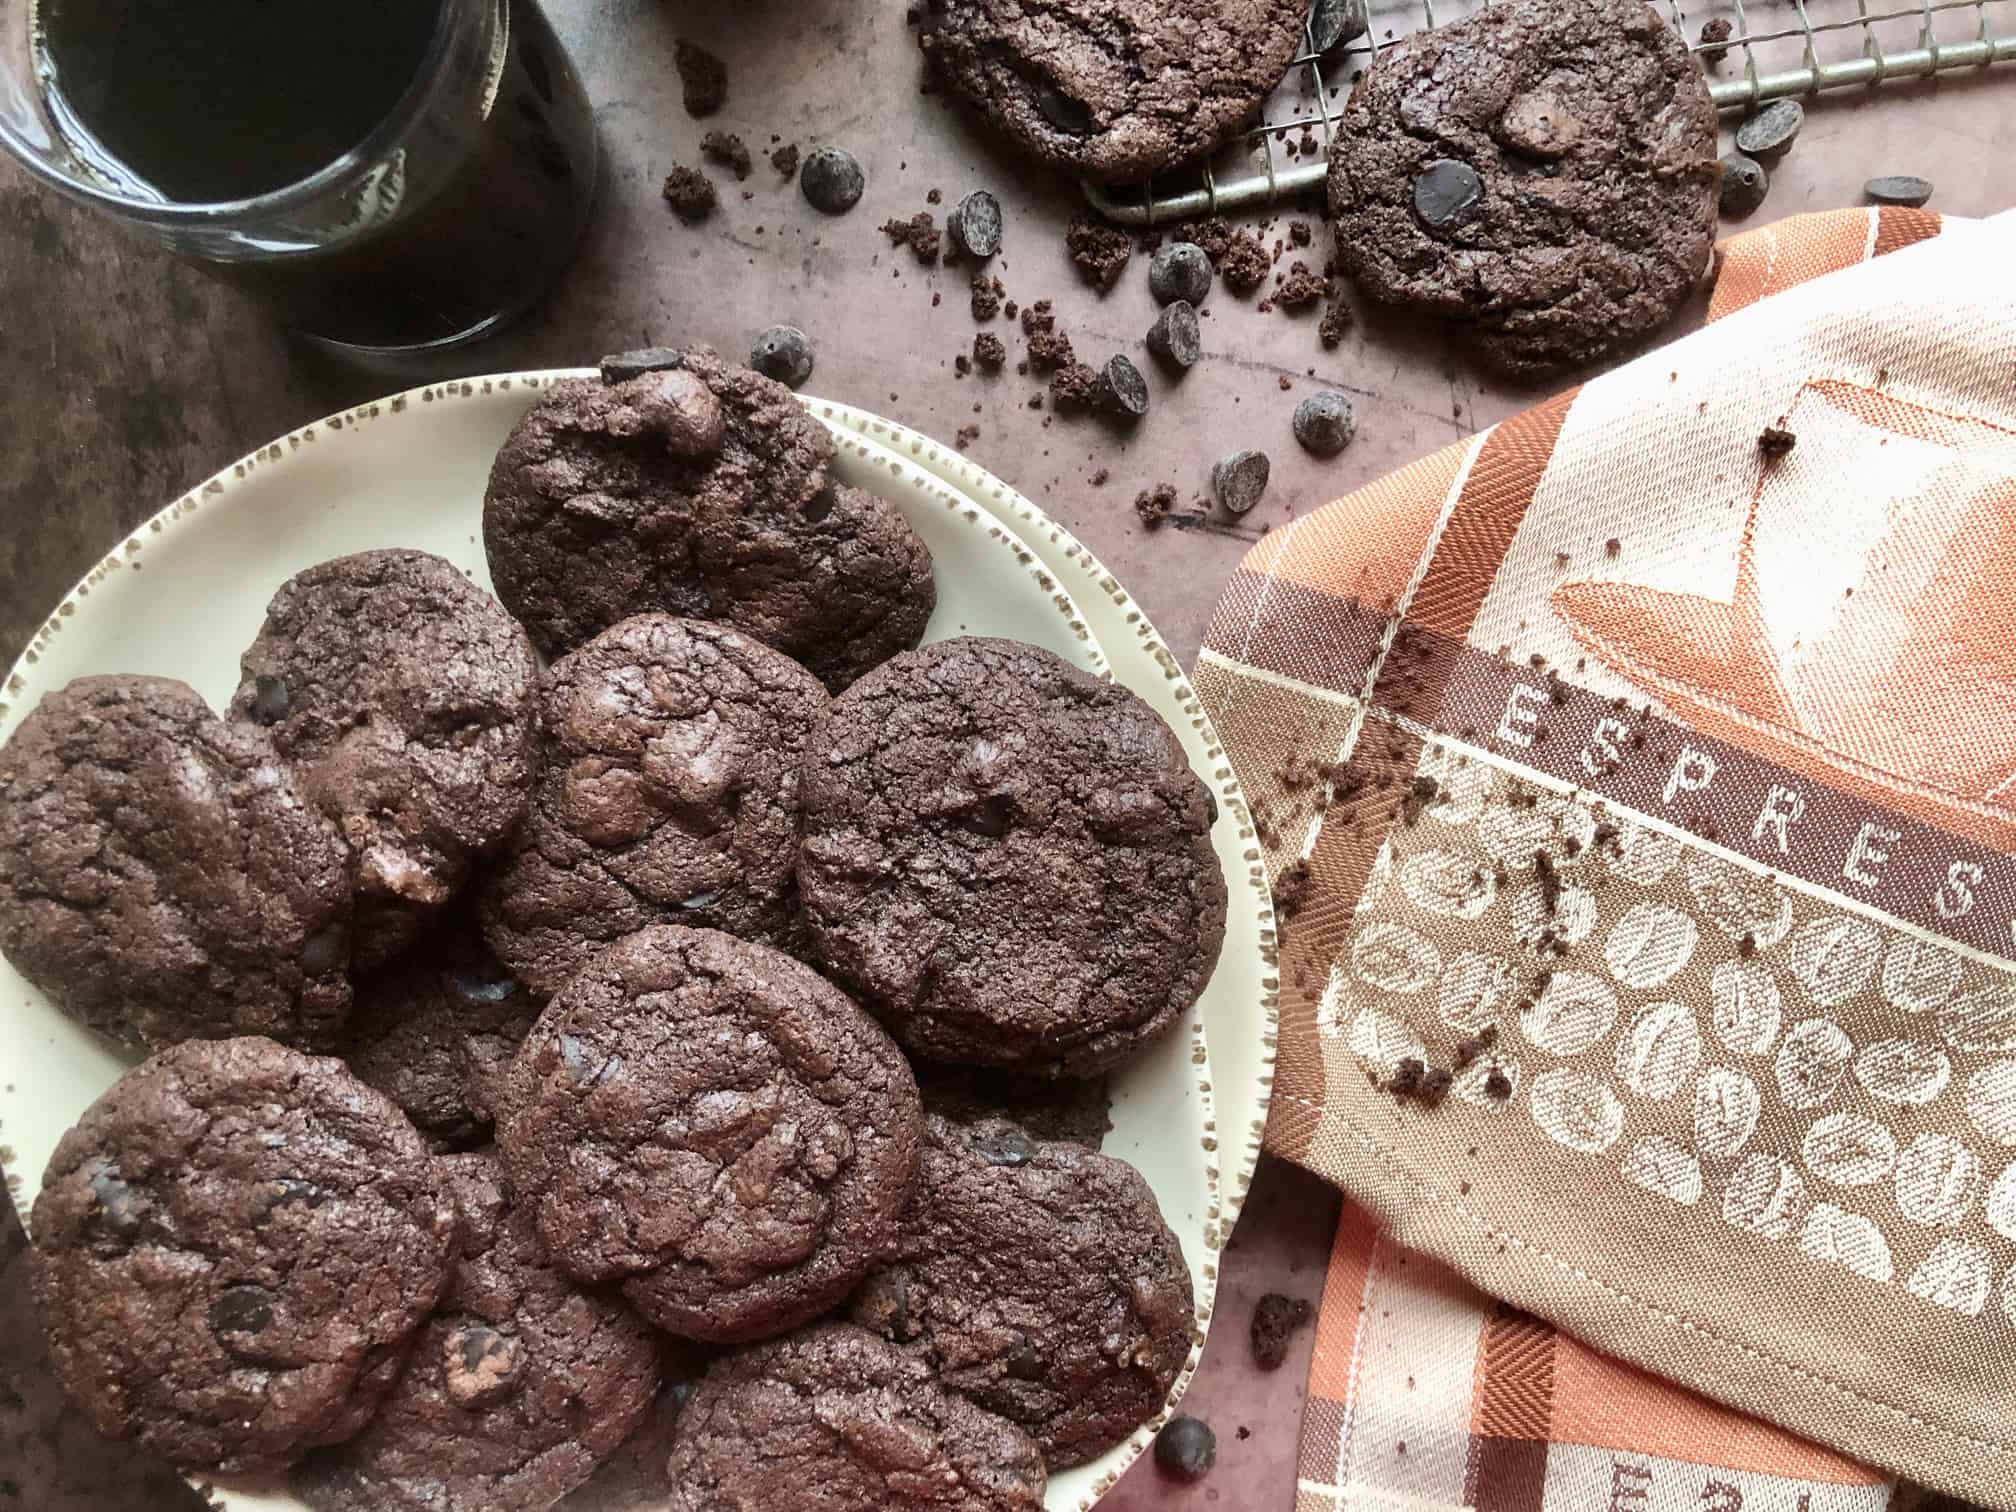 A Coffee Lover's Cookie: How To Make Coffee Chocolate Chip Cookies 